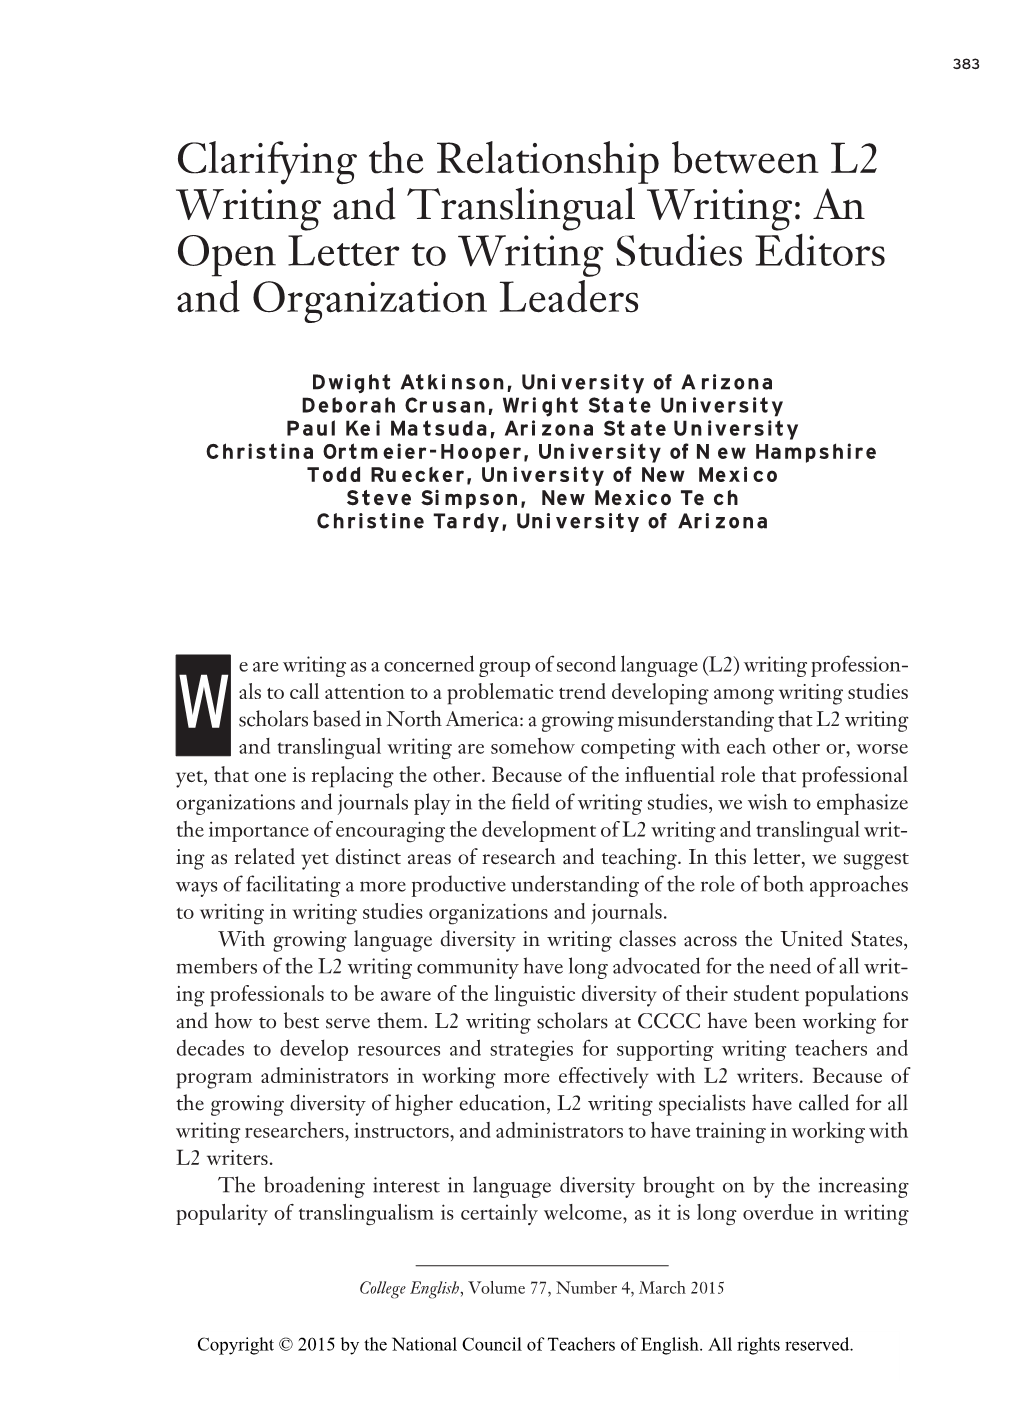 Clarifying the Relationship Between L2 Writing and Translingual Writing: an Open Letter to Writing Studies Editors and Organization Leaders